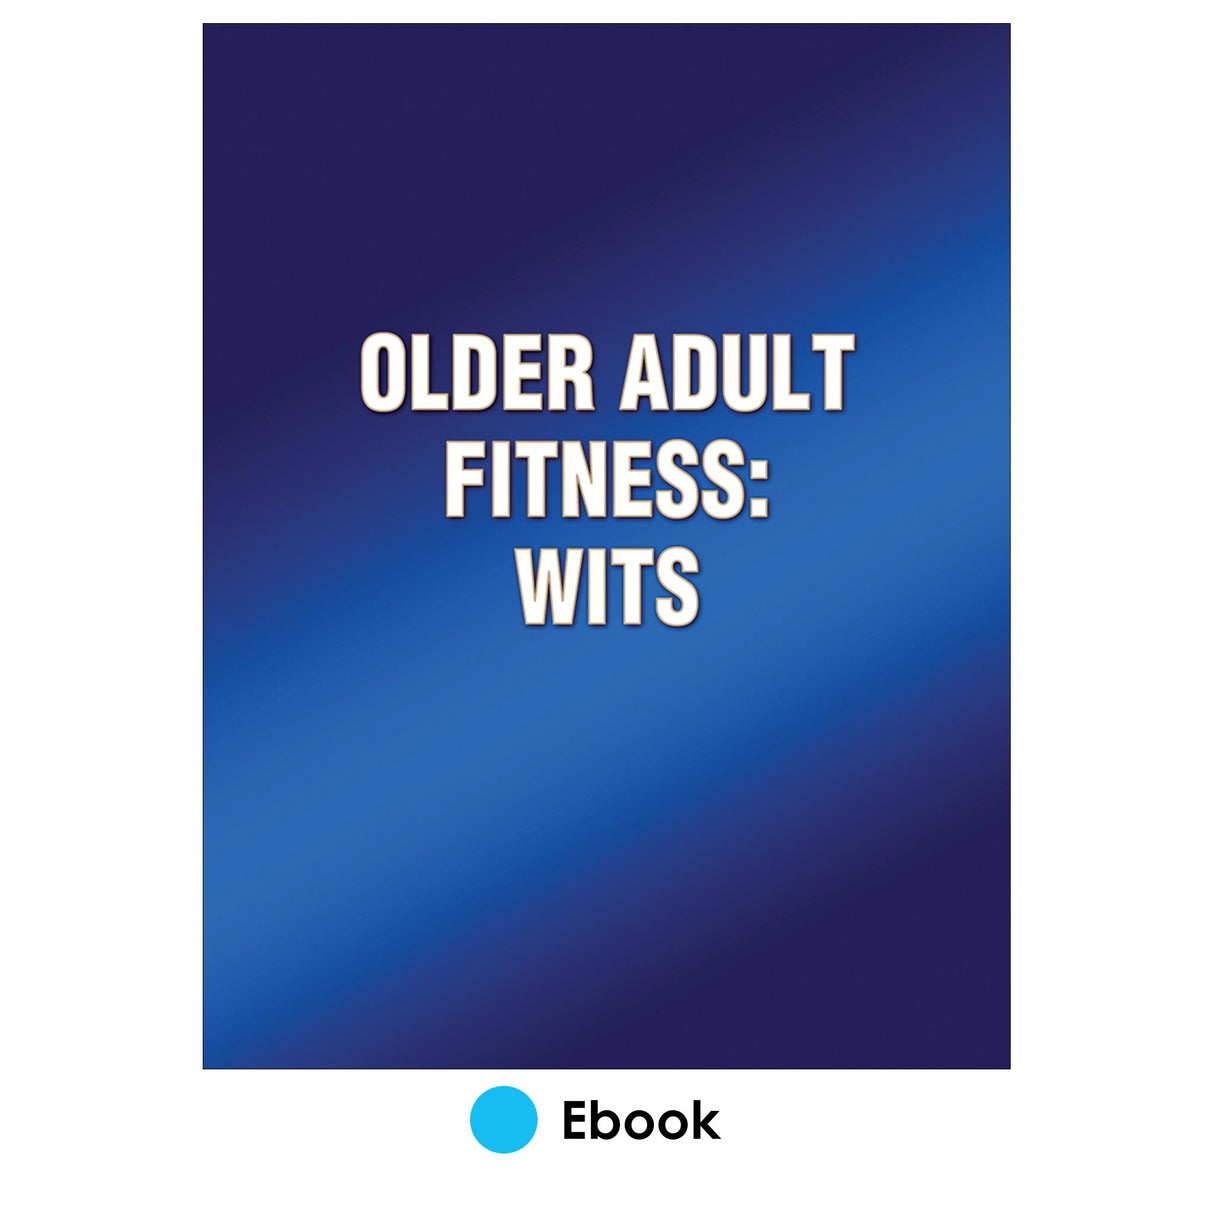 Older Adult Fitness: WITS